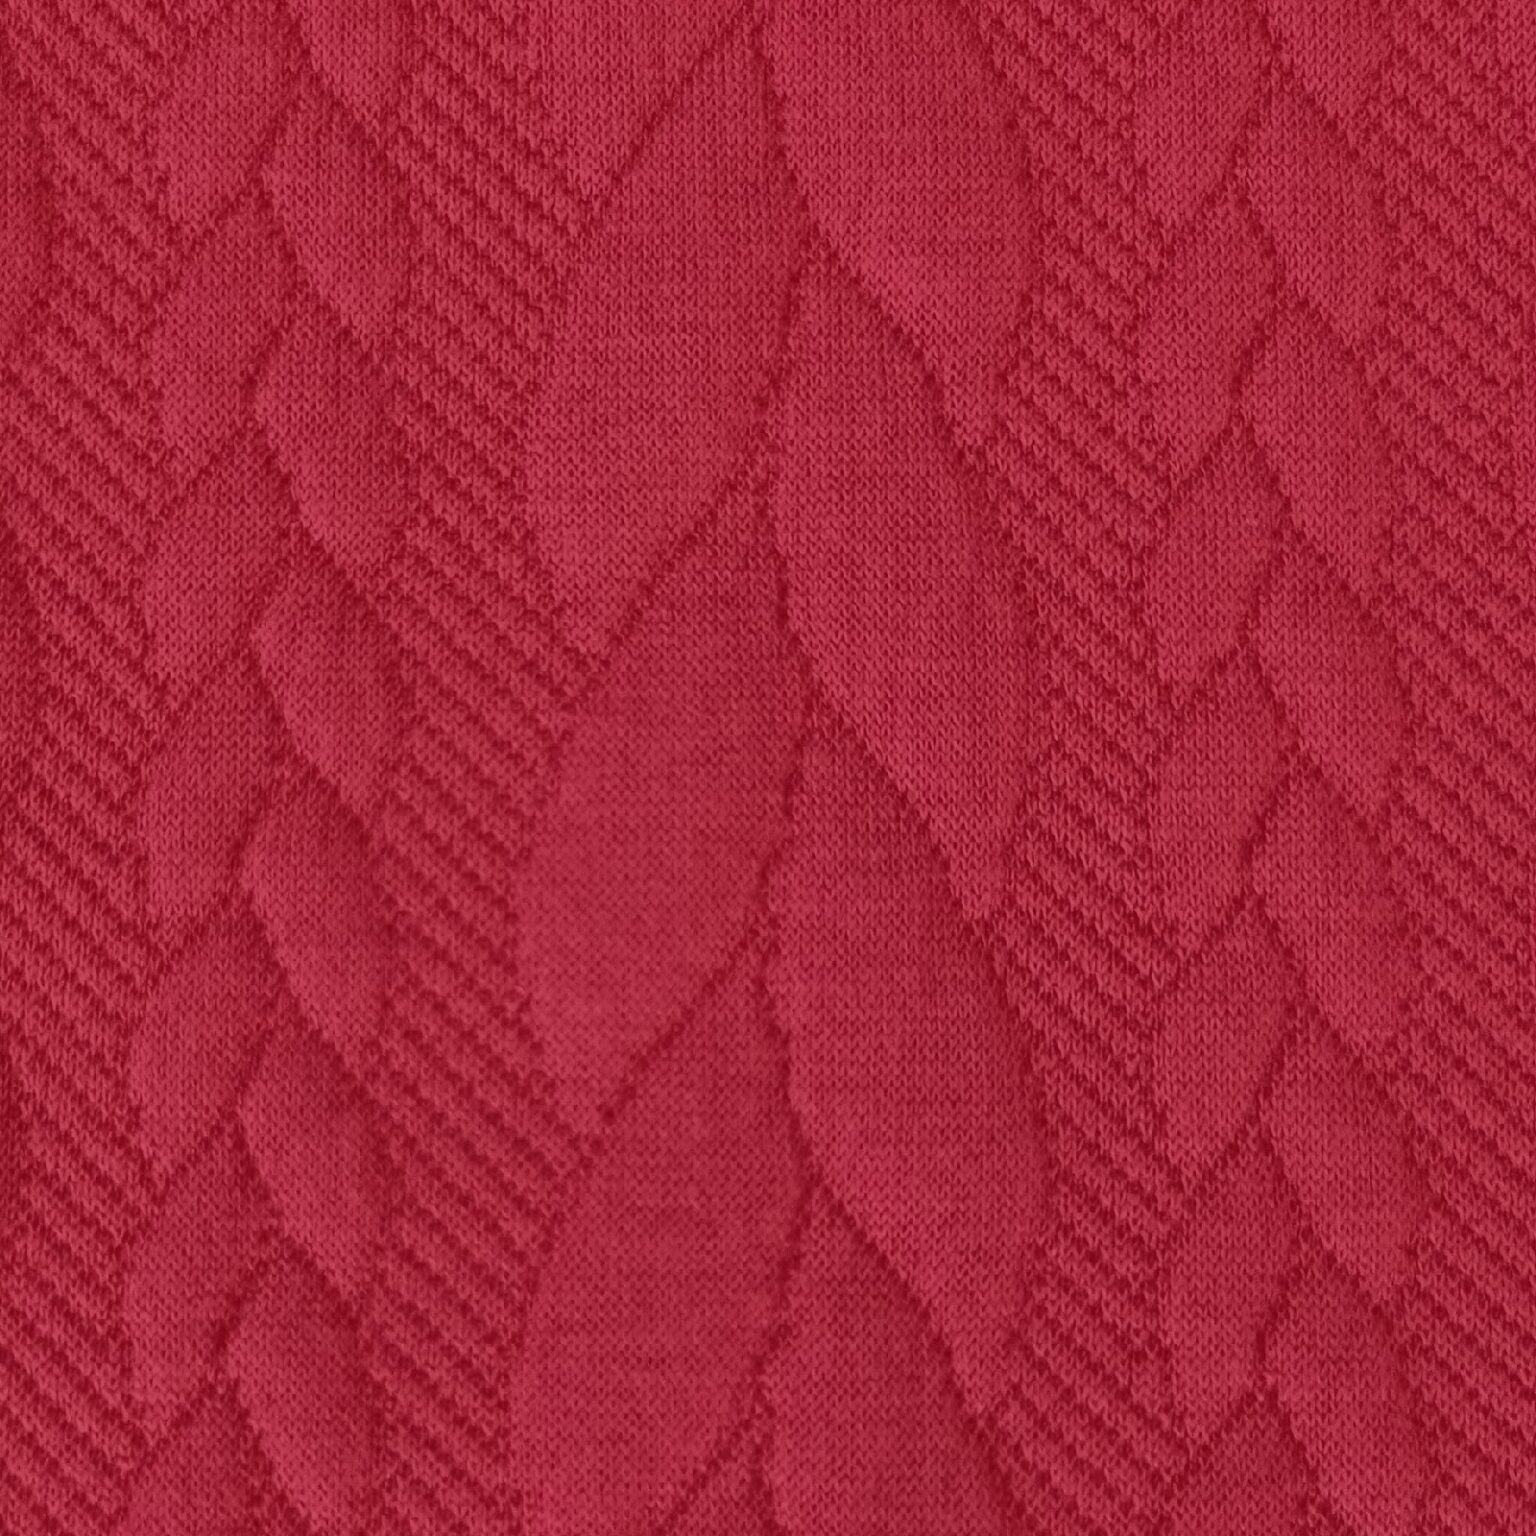 cable knit jersey fabric, red | More Sewing